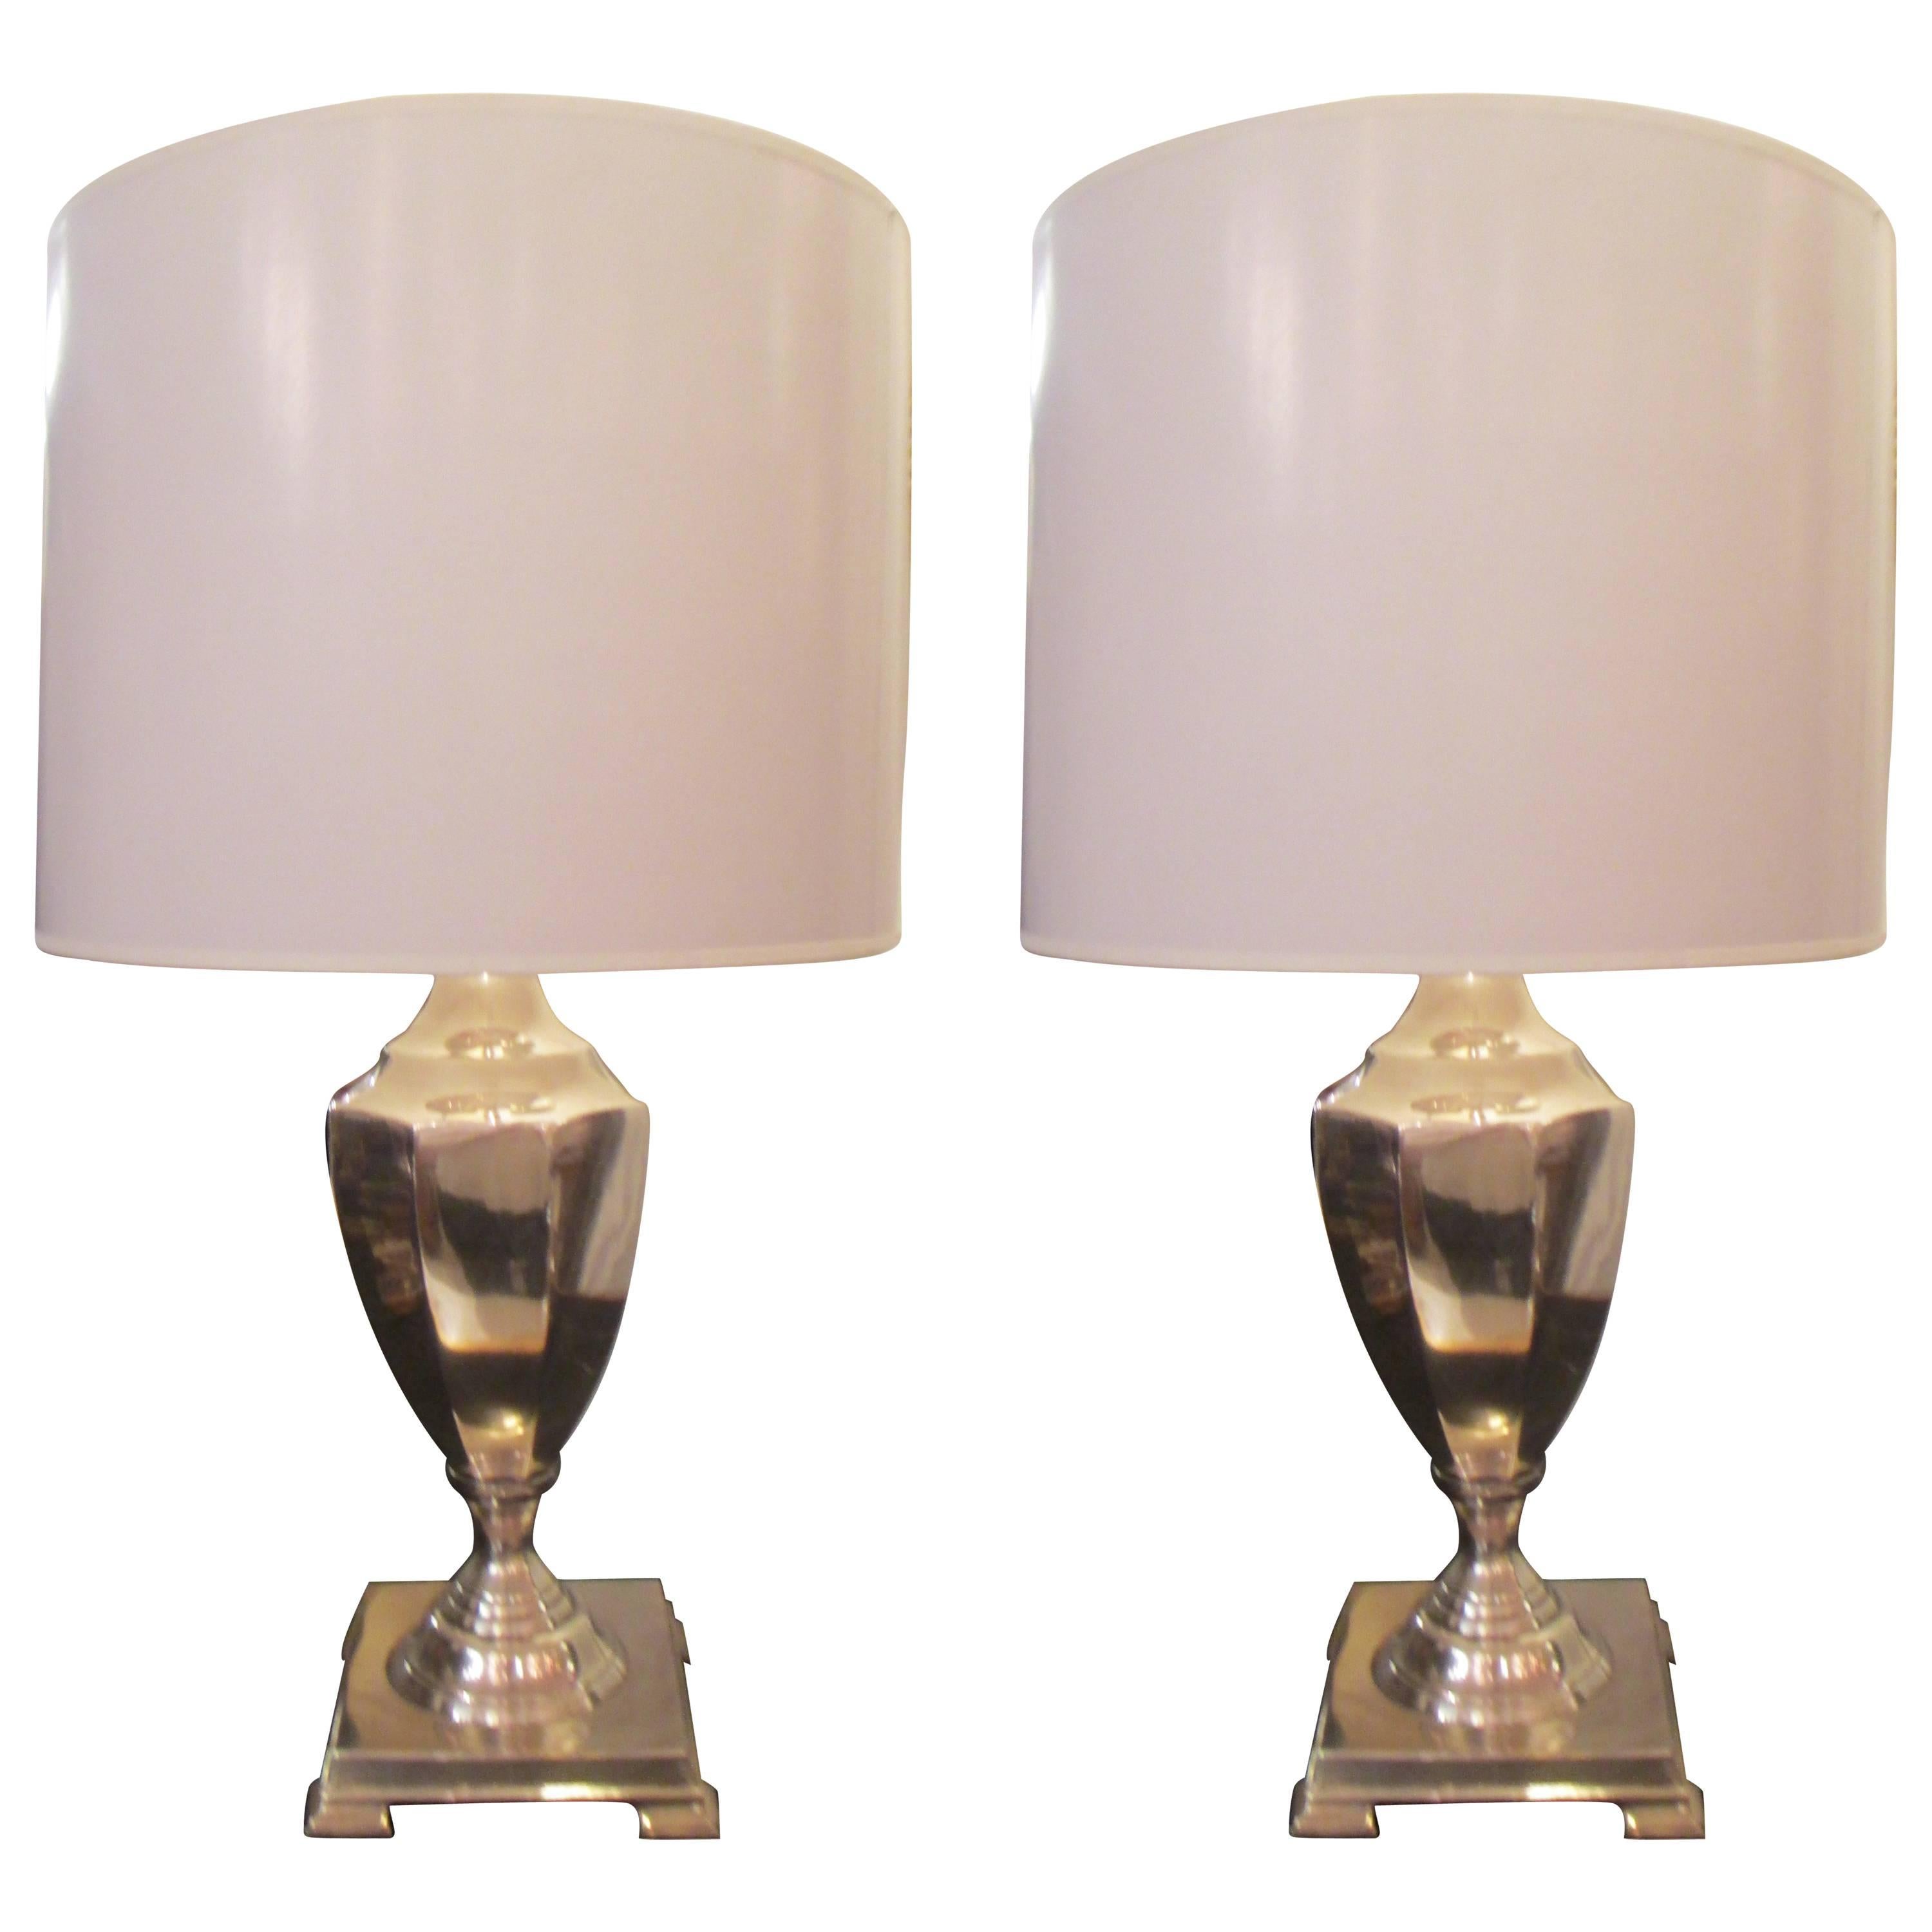 Pair of Classical Chrome-Plated Urn Lamps